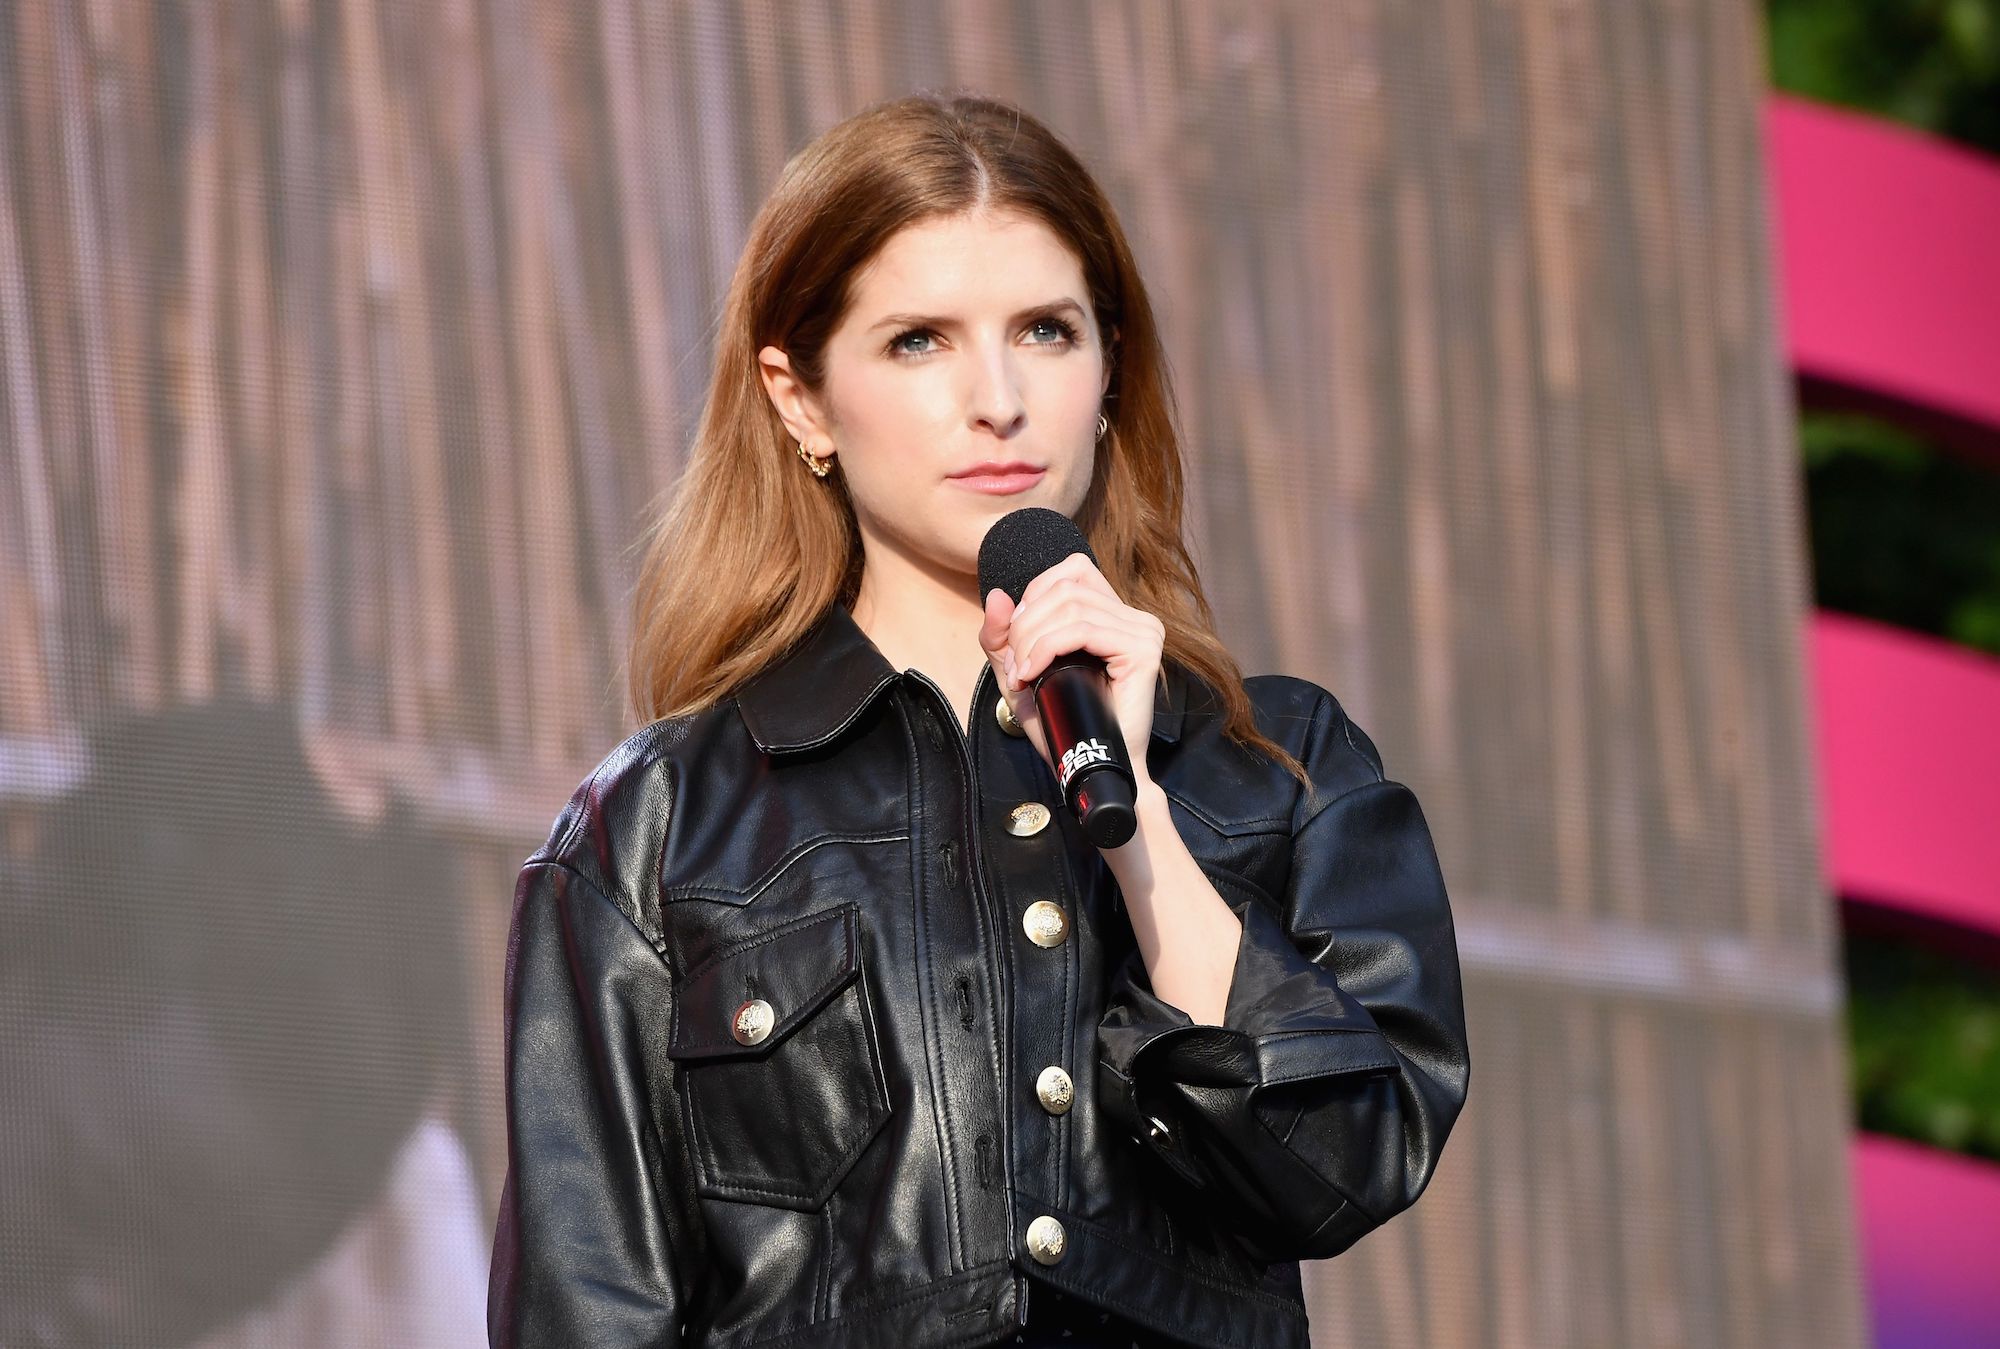 Anna Kendrick Thought Her 'Twilight' Character Was an 'Idiot,' But  Improvised a Clever 'New Moon' Quote